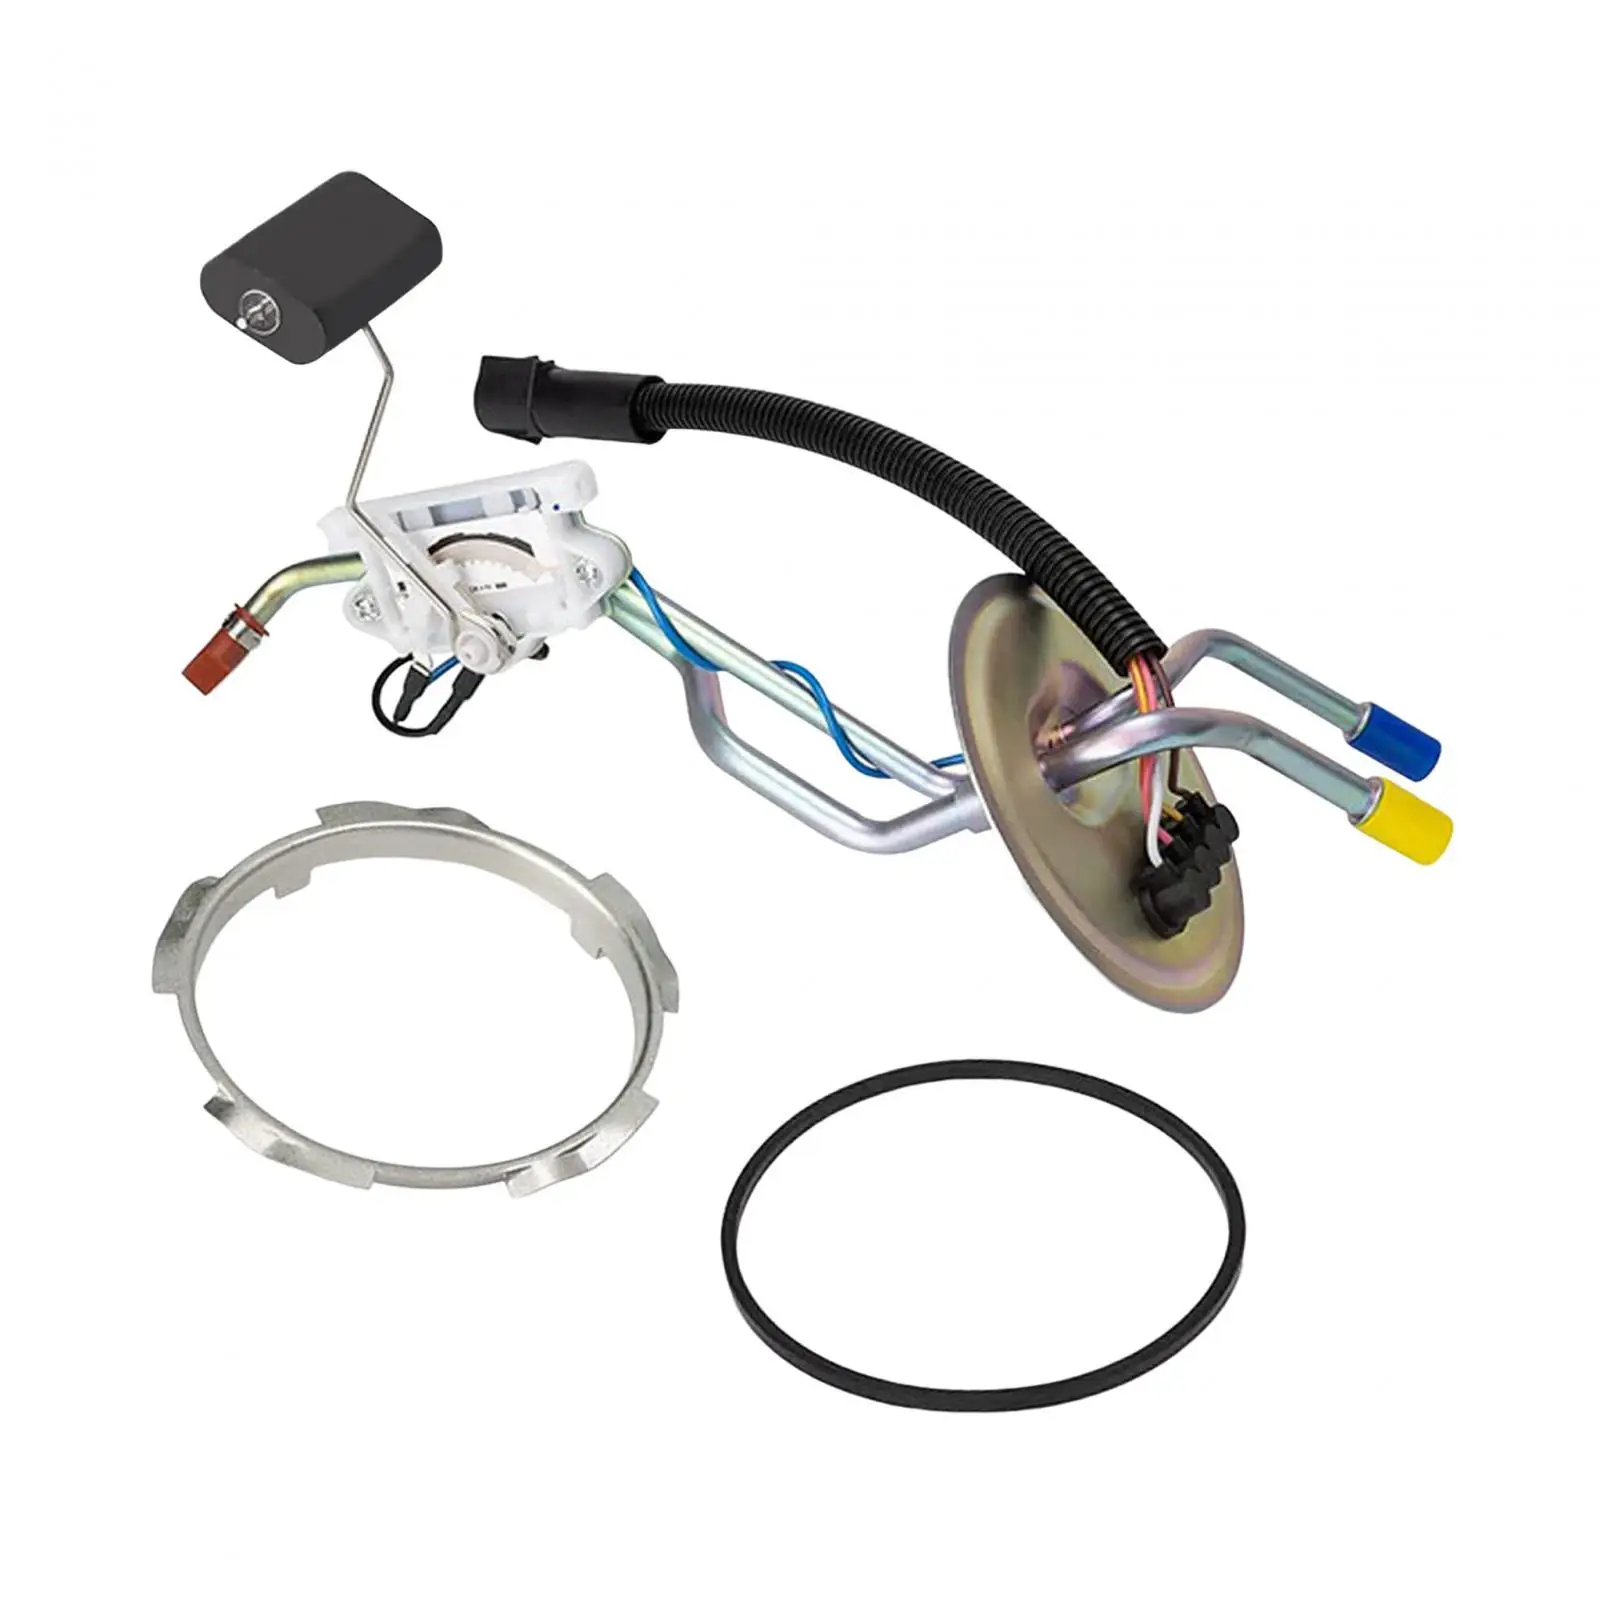 Diesel Fuel Sending Unit Fmsu-9der Repair Parts for Ford F250 F350 1994-1997 Easily to Install Durable Accessories